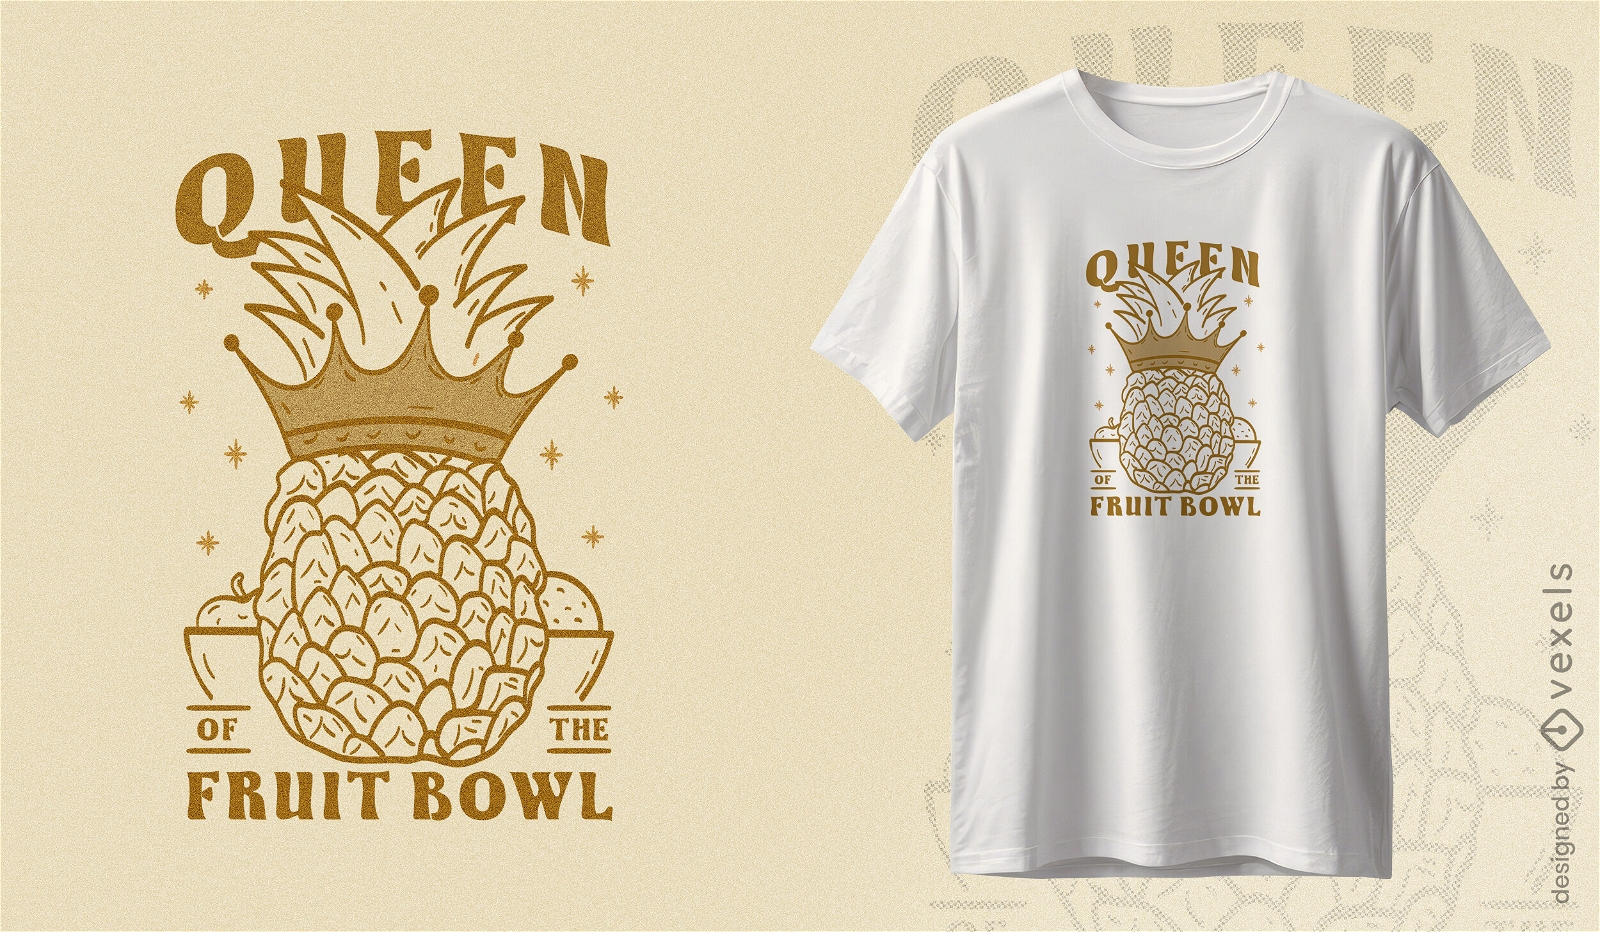 Pineapple queen of the fruit bowl t-shirt design